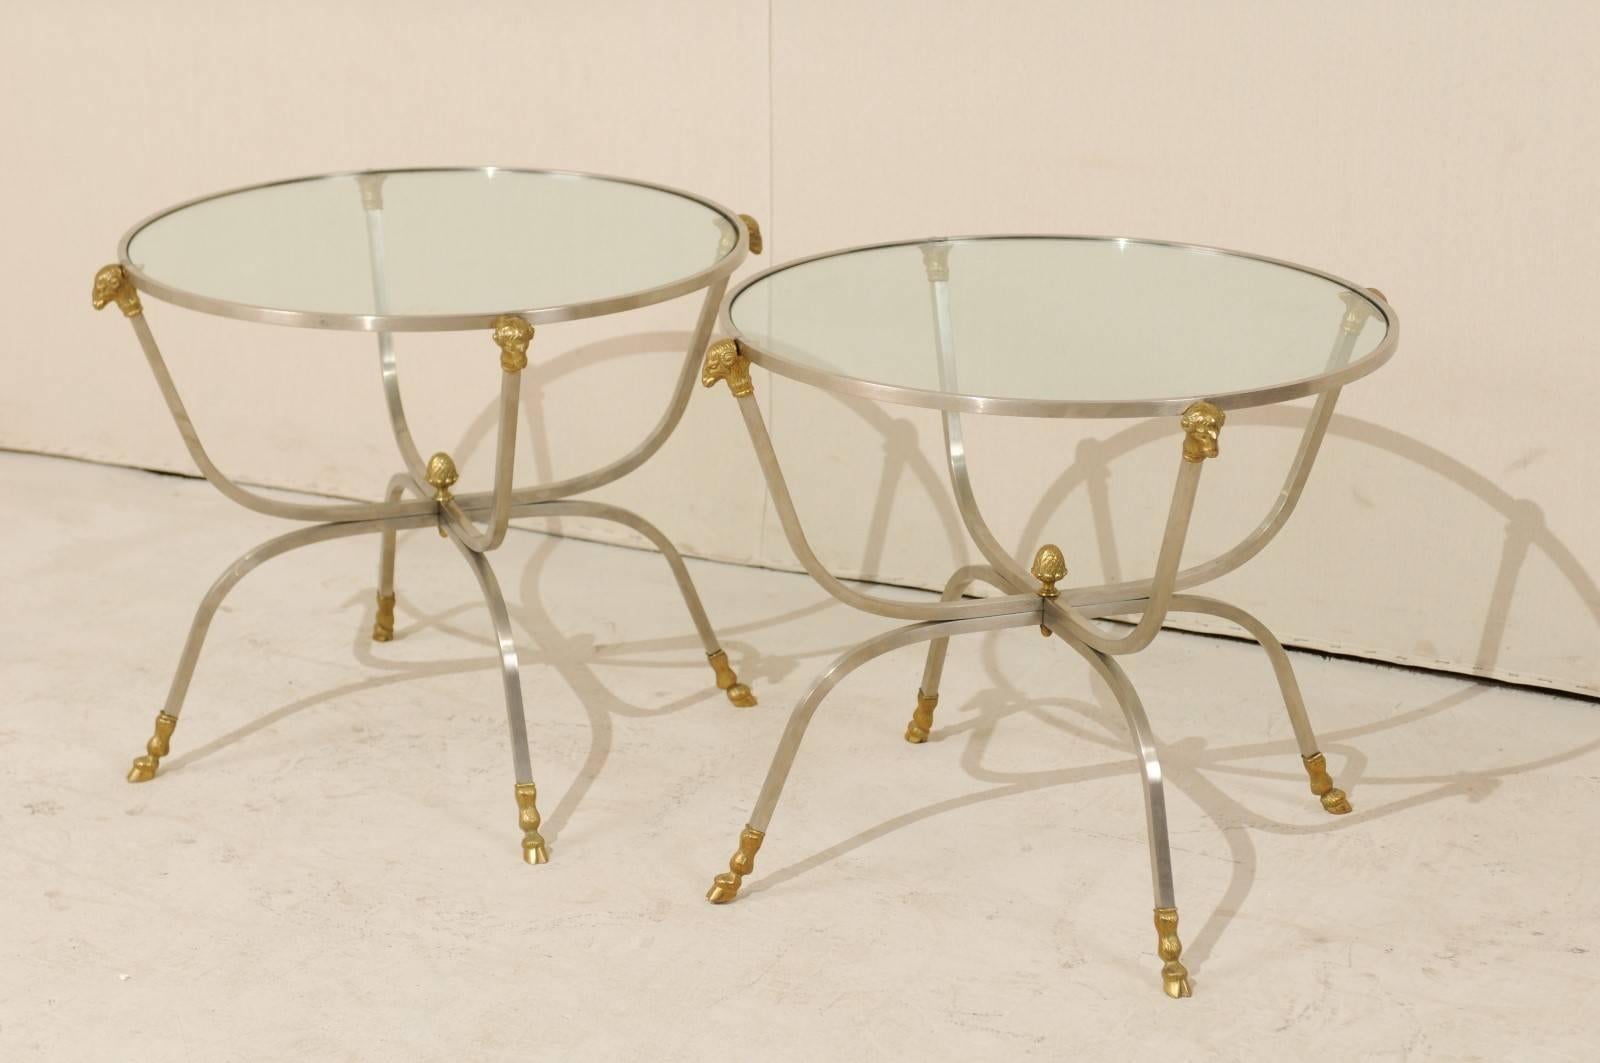 Pair of Italian Glass, Brass and Silver Metal Side Tables with Ram's Head Motifs 2